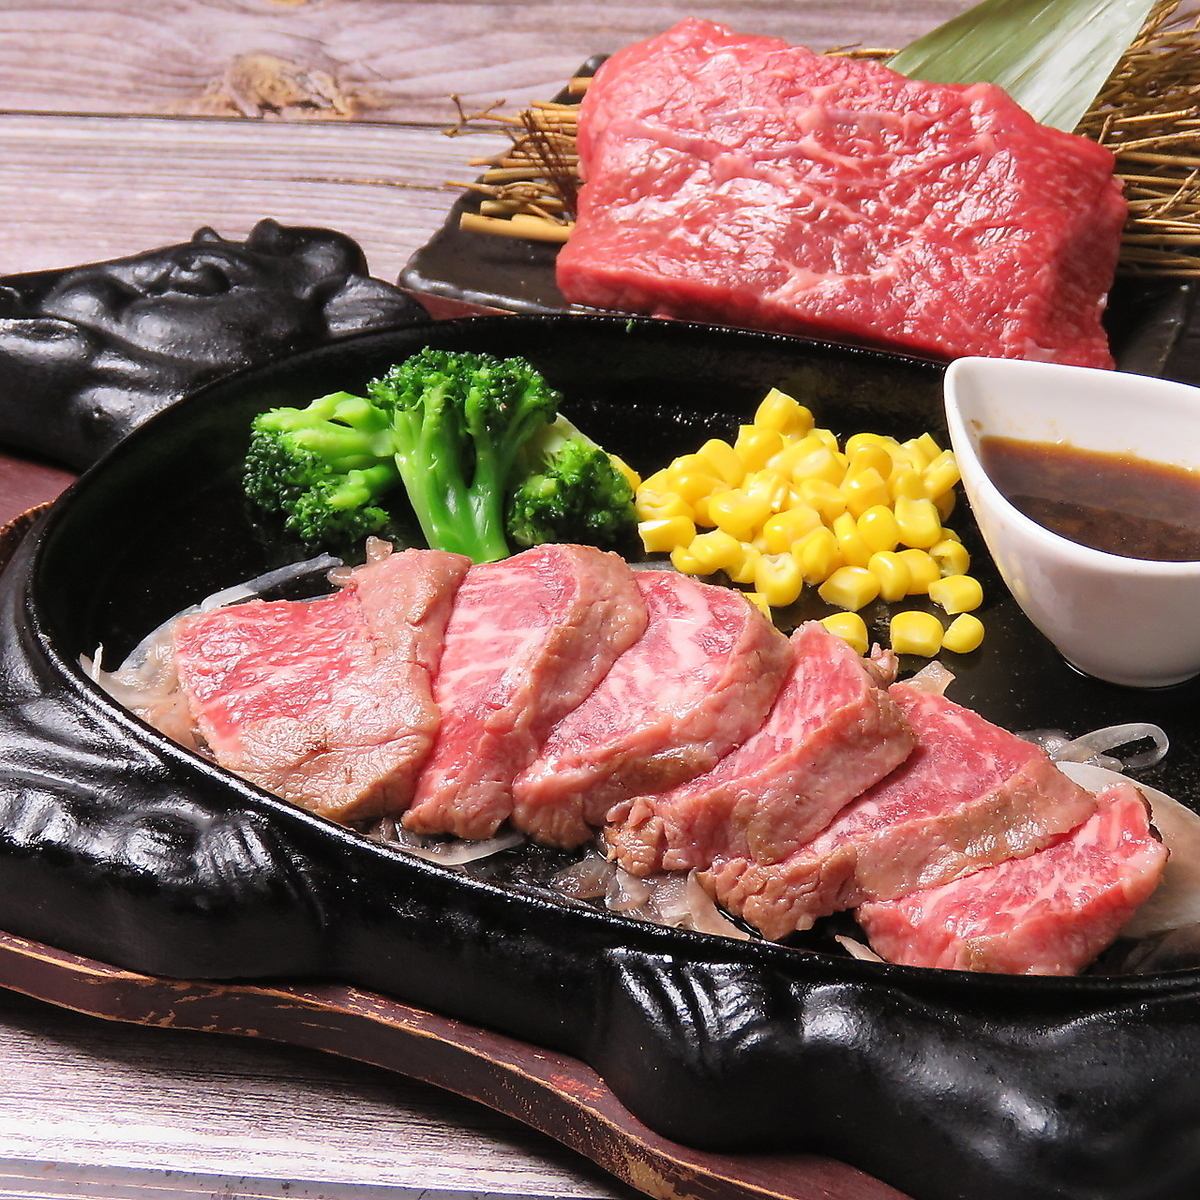 Luxuriously enjoy "Noto Beef", which is also recommended for tourists!